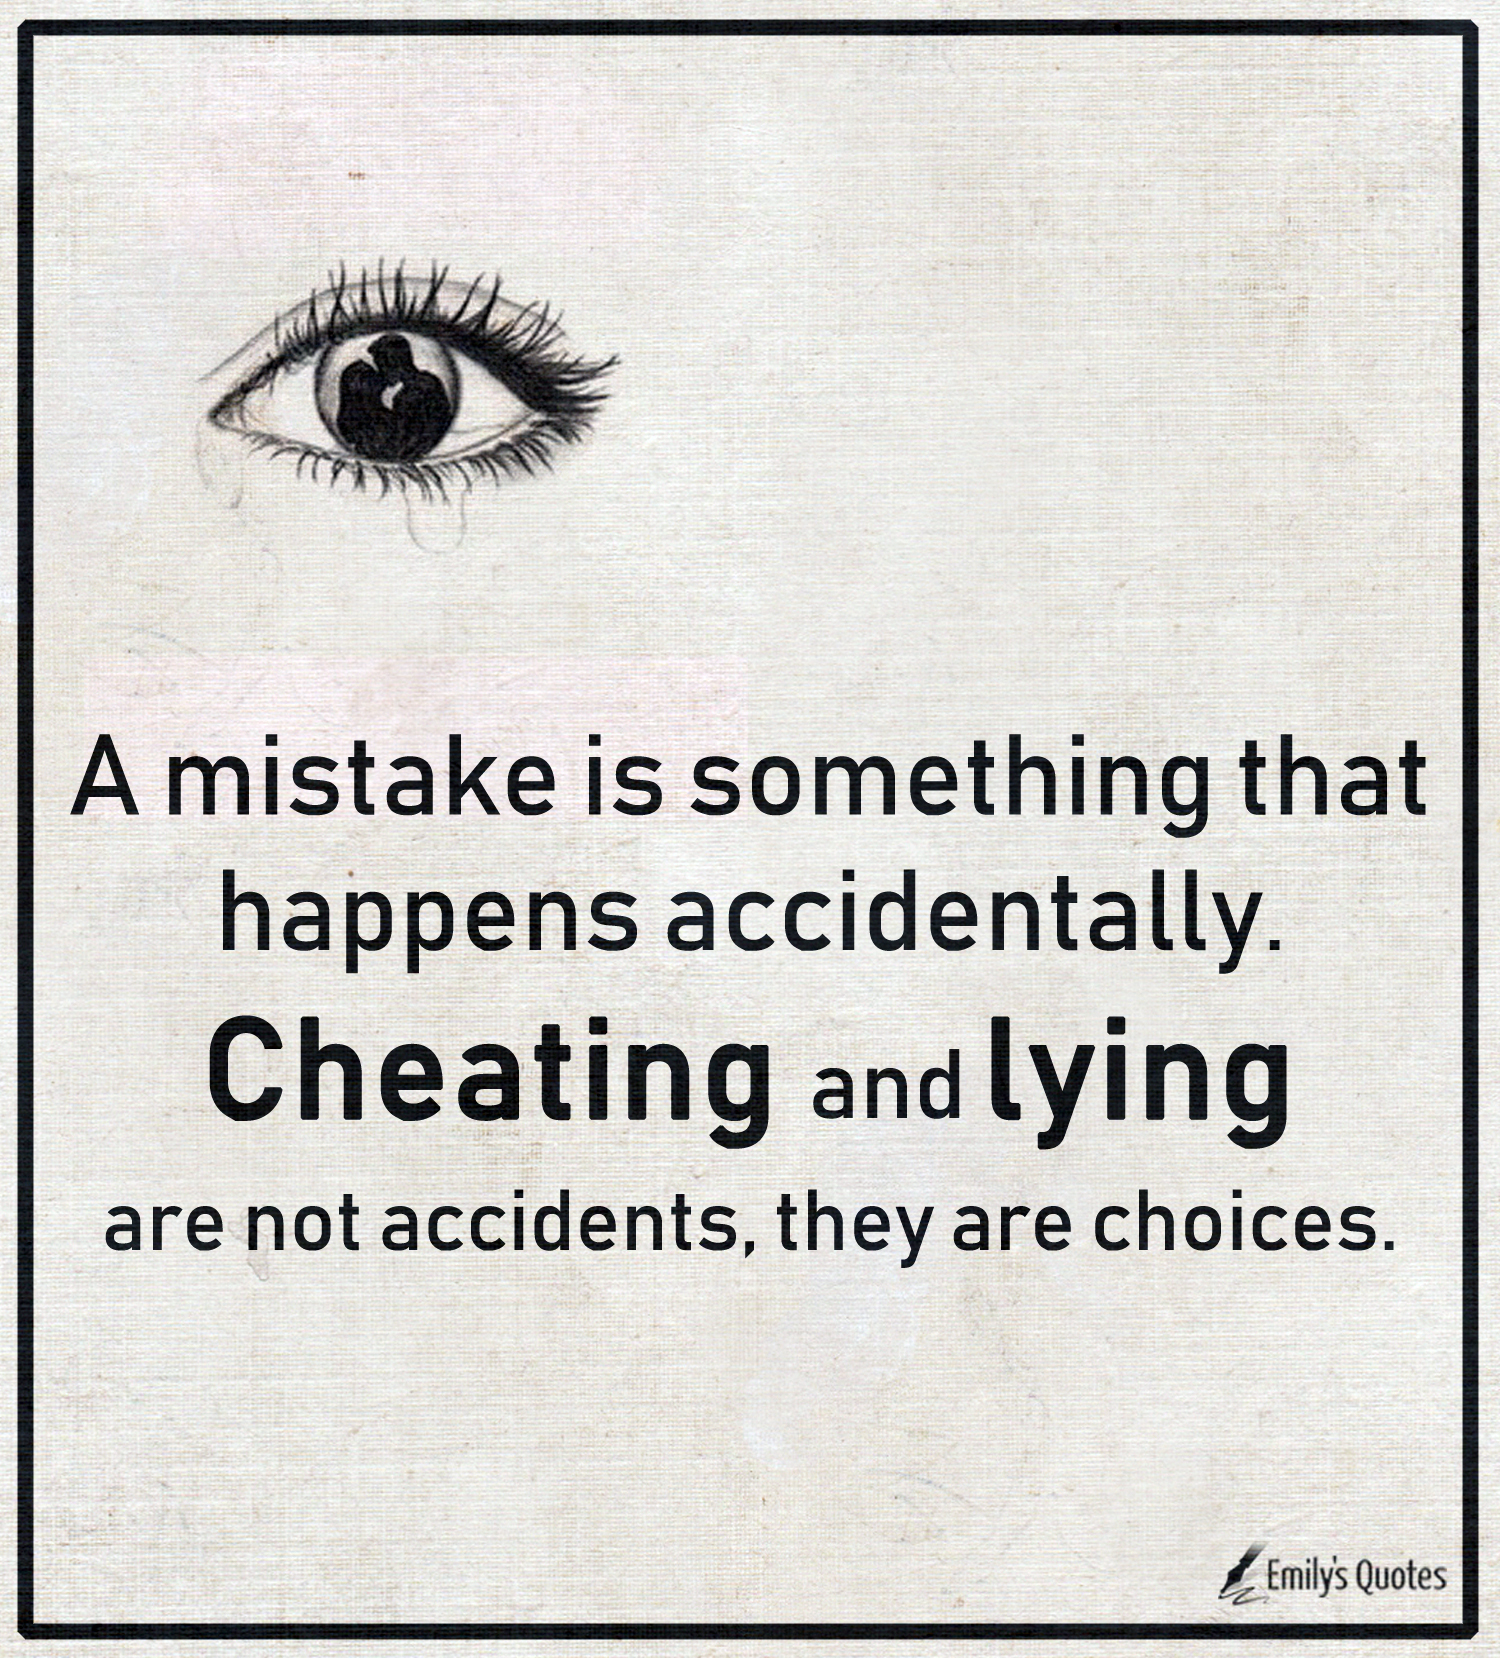 A mistake is something that happens accidentally. Cheating and lying are